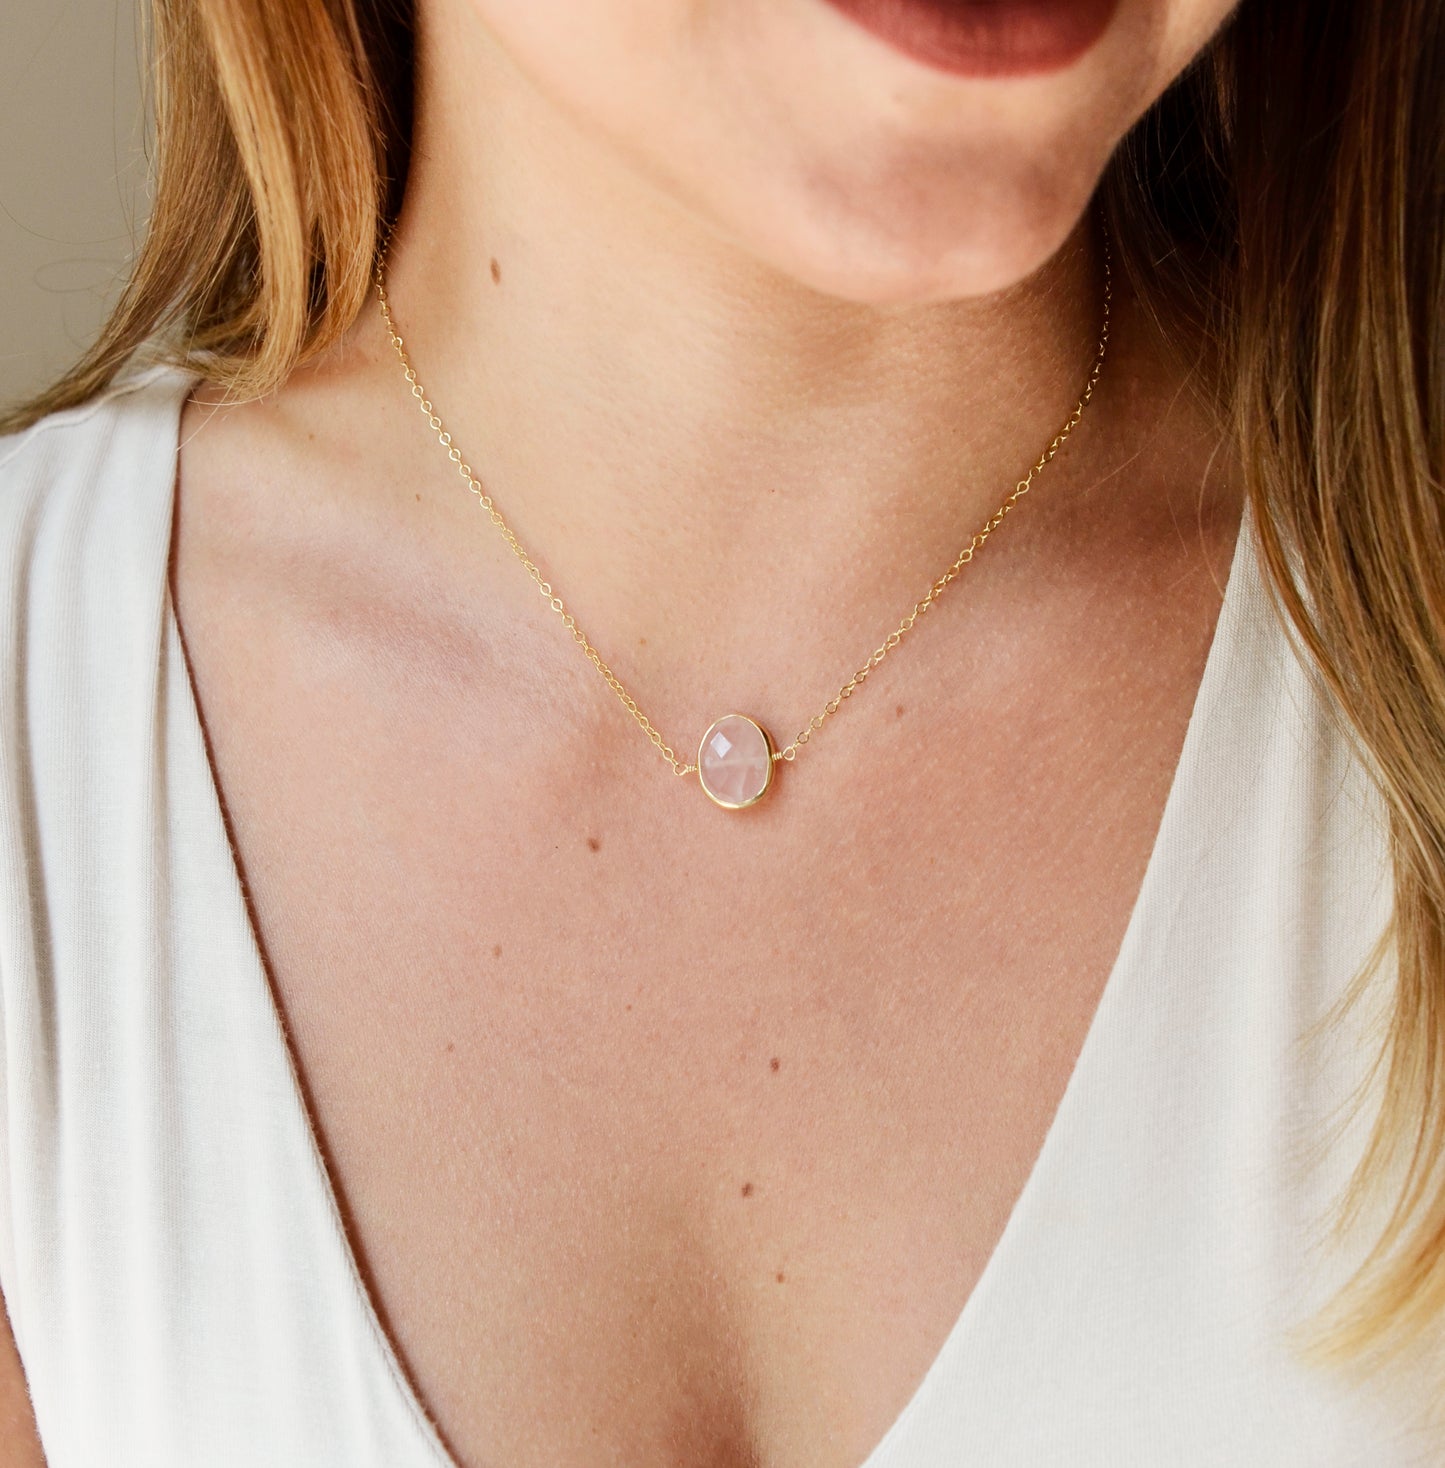 Dainty pink Rose Quartz oval coin shaped pendant with gold bezel. Chain is 14k Gold Filled. Modeled Image